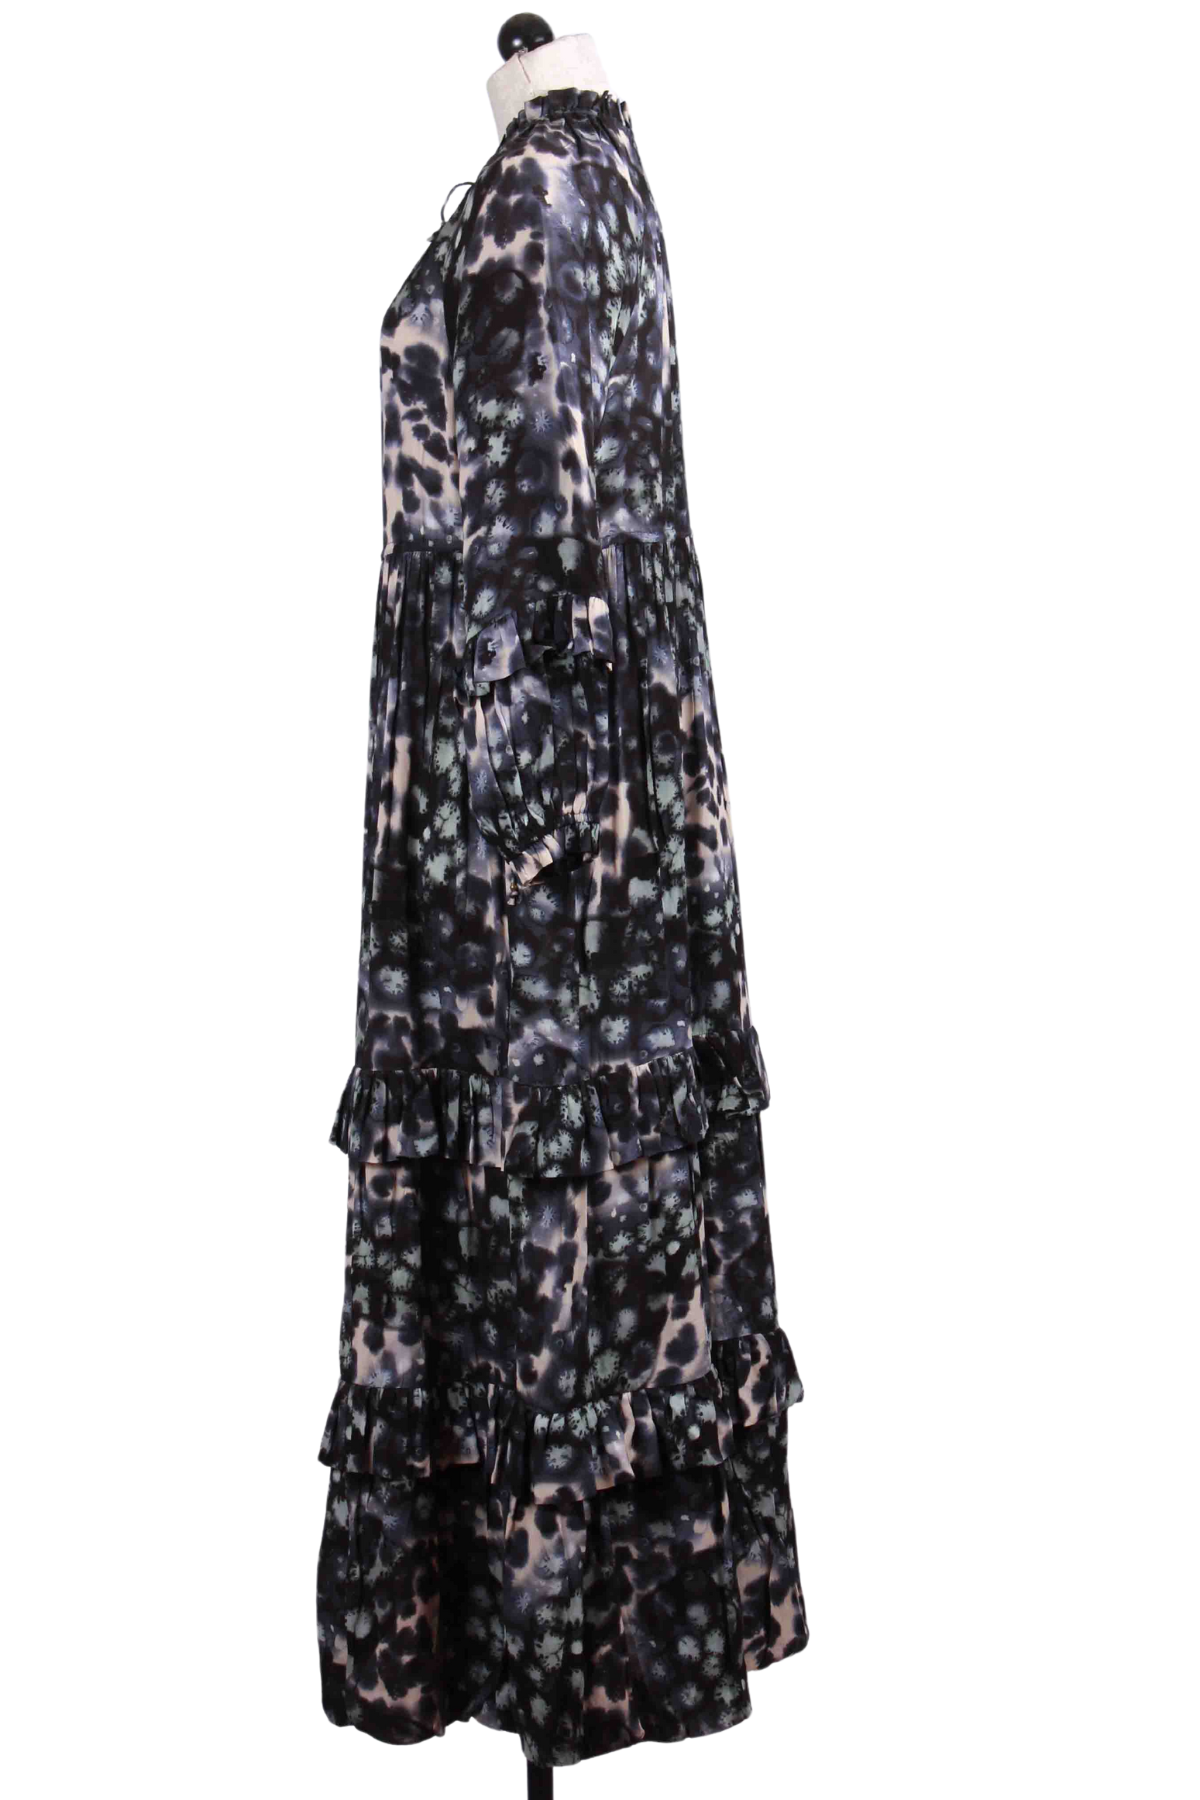 side view of Speckle Printed Cove Dress by Marie Oliver